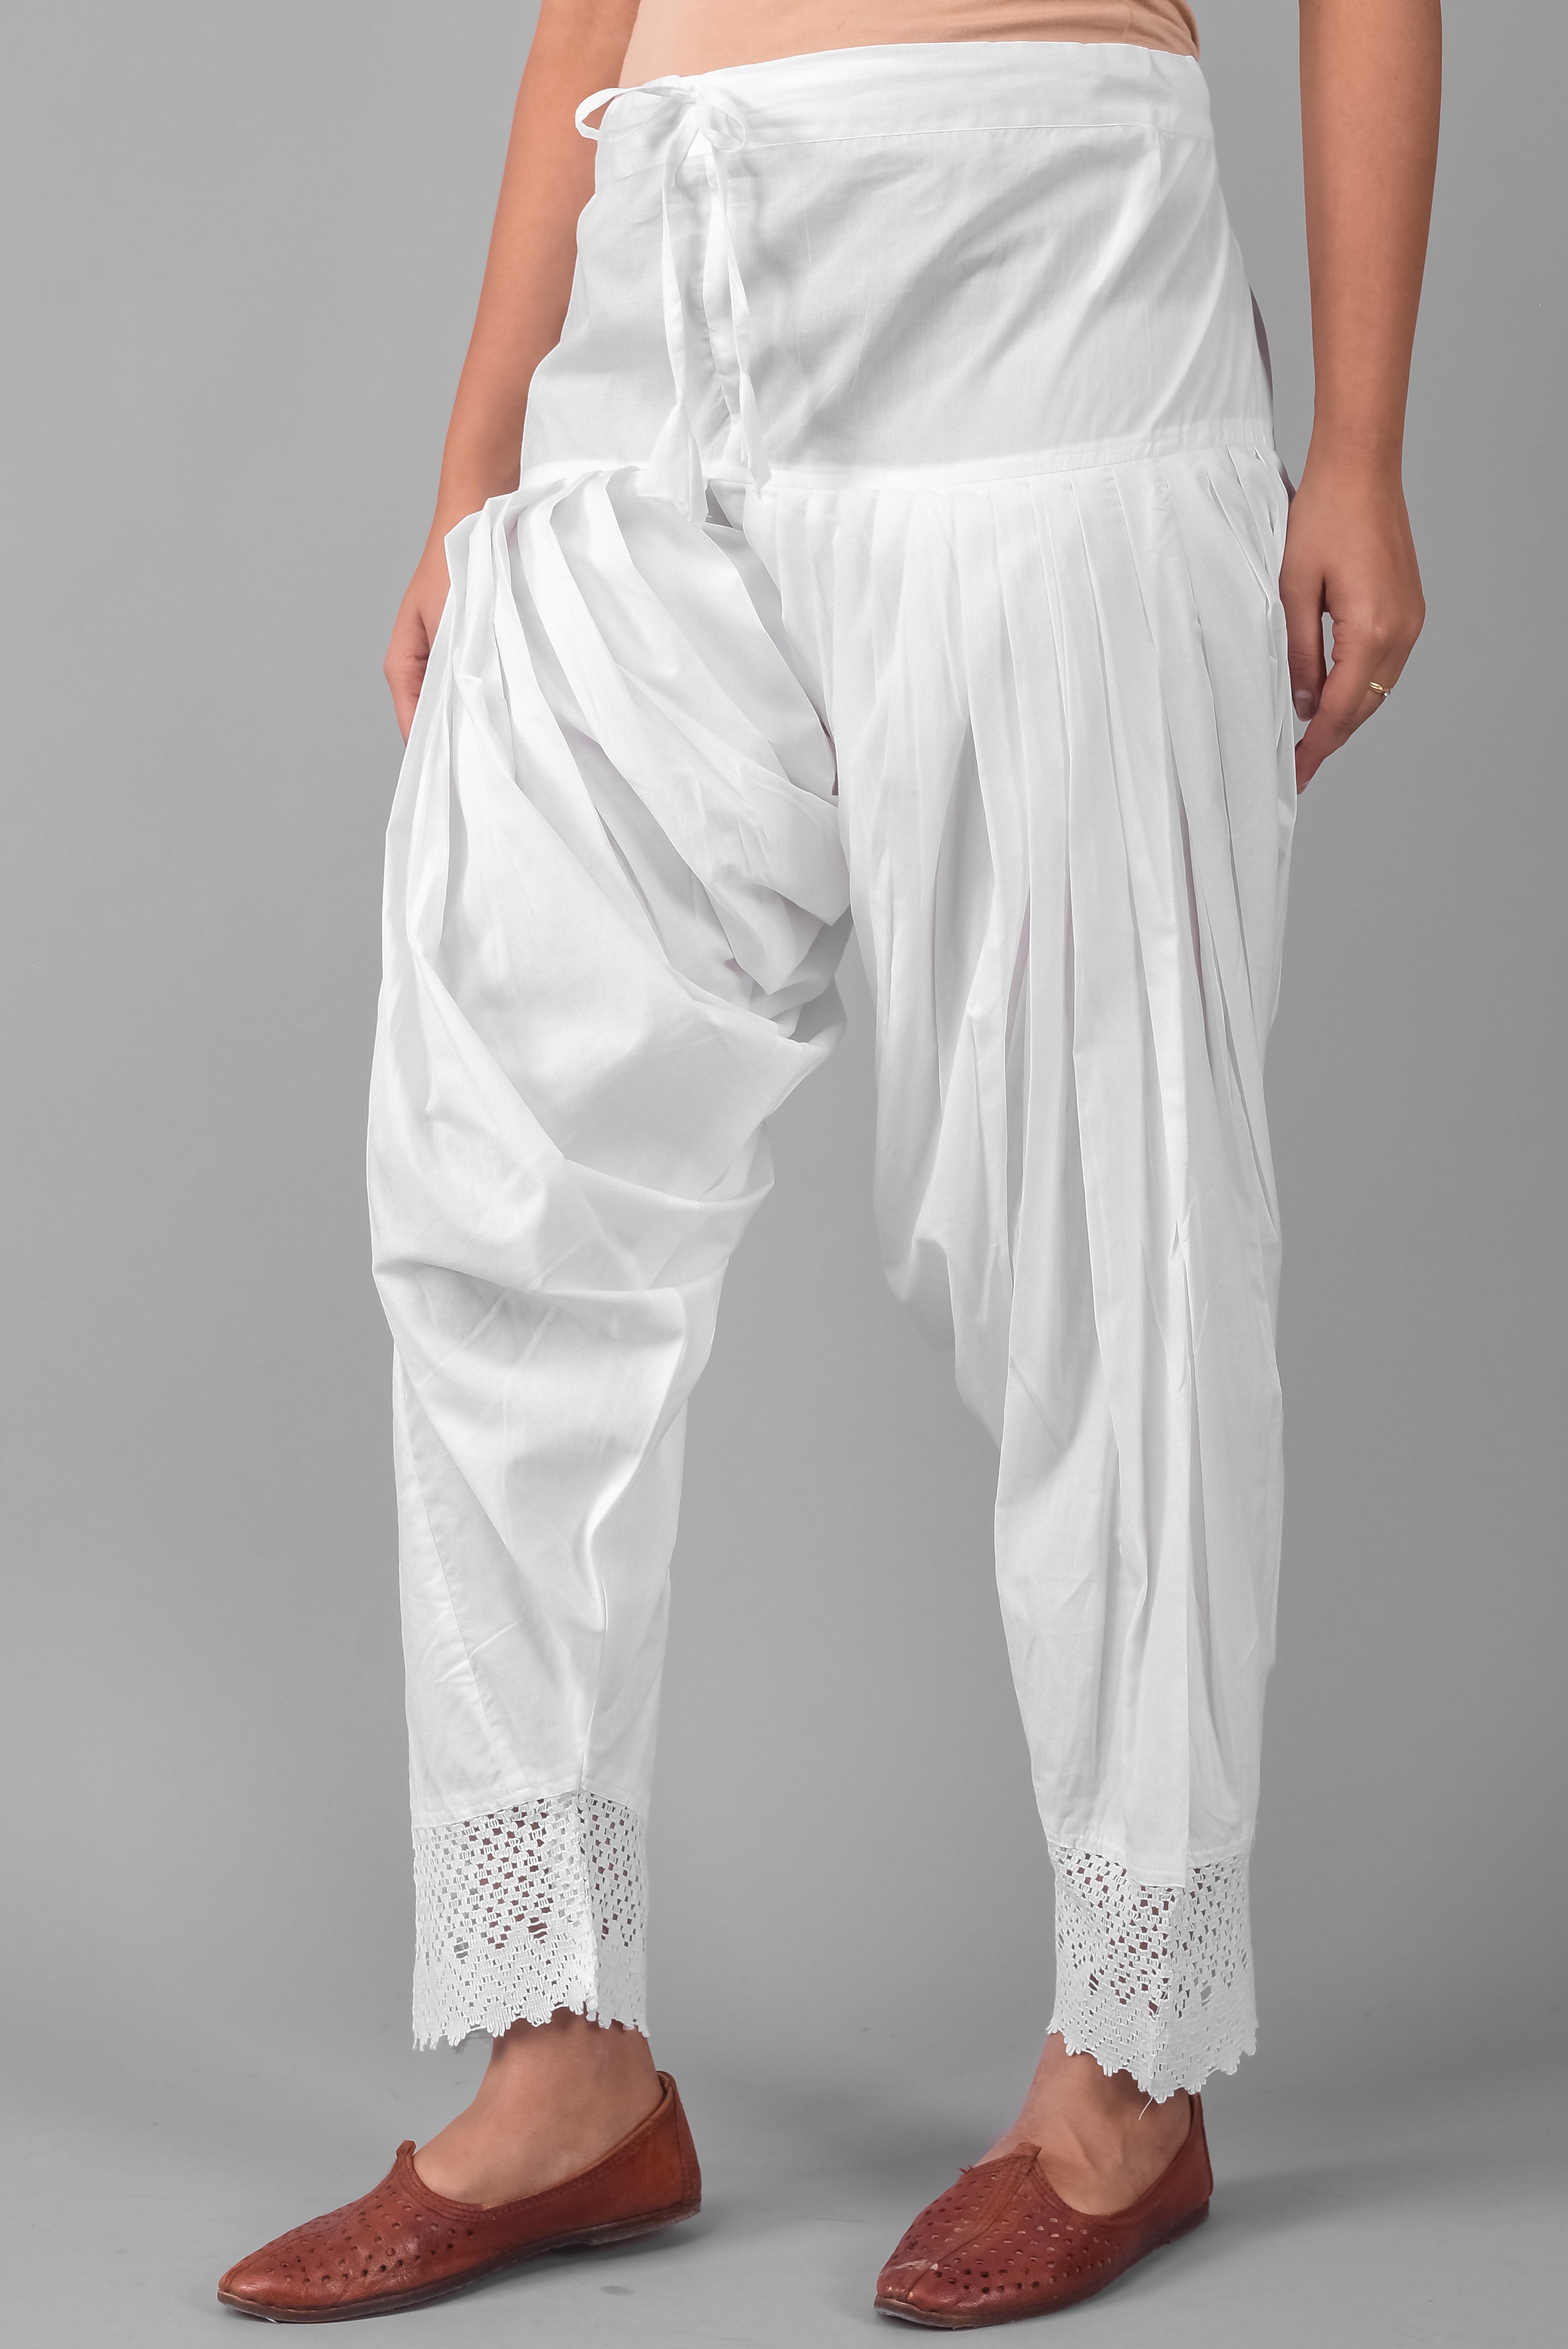 Stitched Casual Patiala Pants, Waist Size: Free at Rs 172/piece in South 24  Parganas